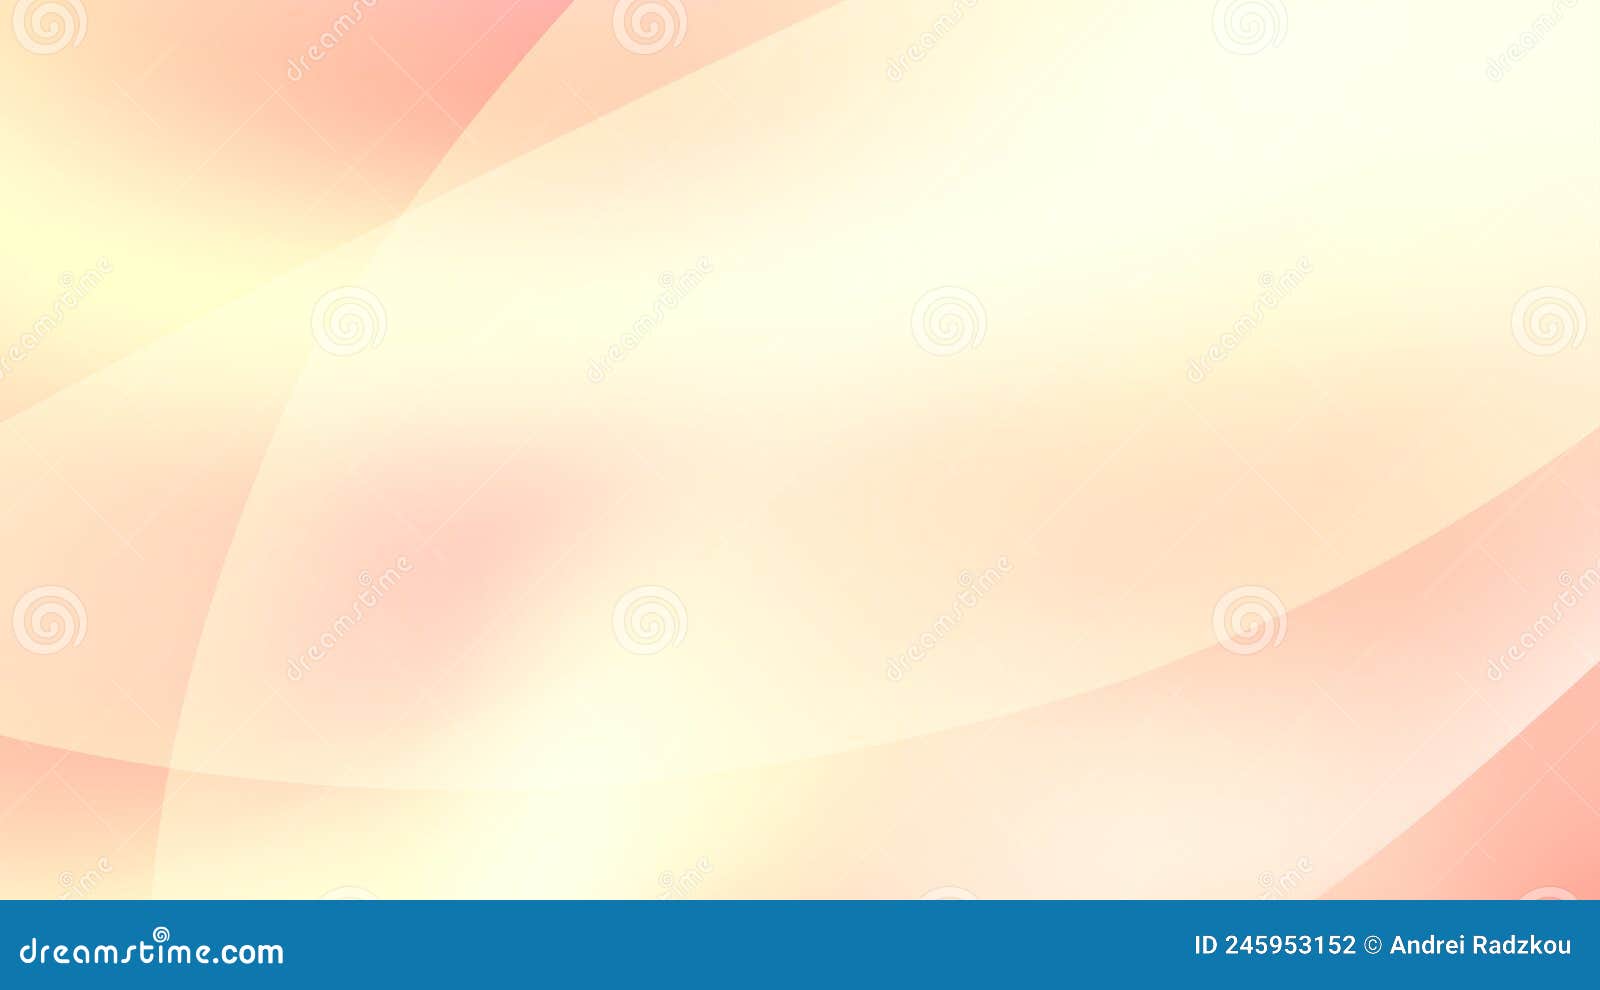 Very Light Orange and Cream Color Background. Minimal Graphics Stock Vector  - Illustration of design, background: 245953152